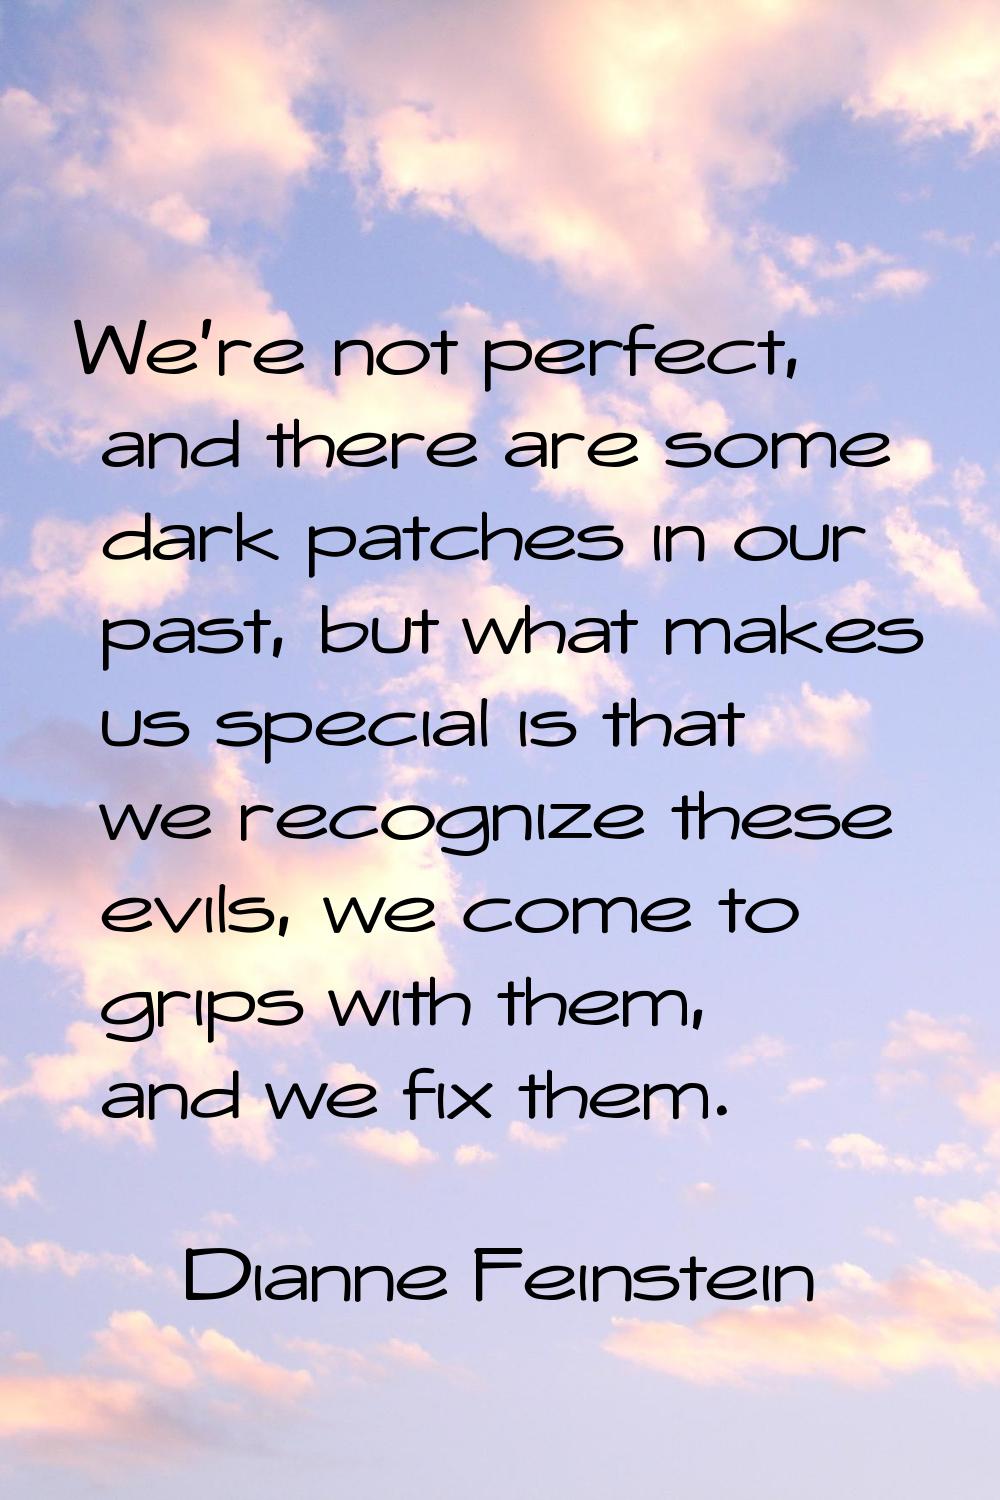 We're not perfect, and there are some dark patches in our past, but what makes us special is that w